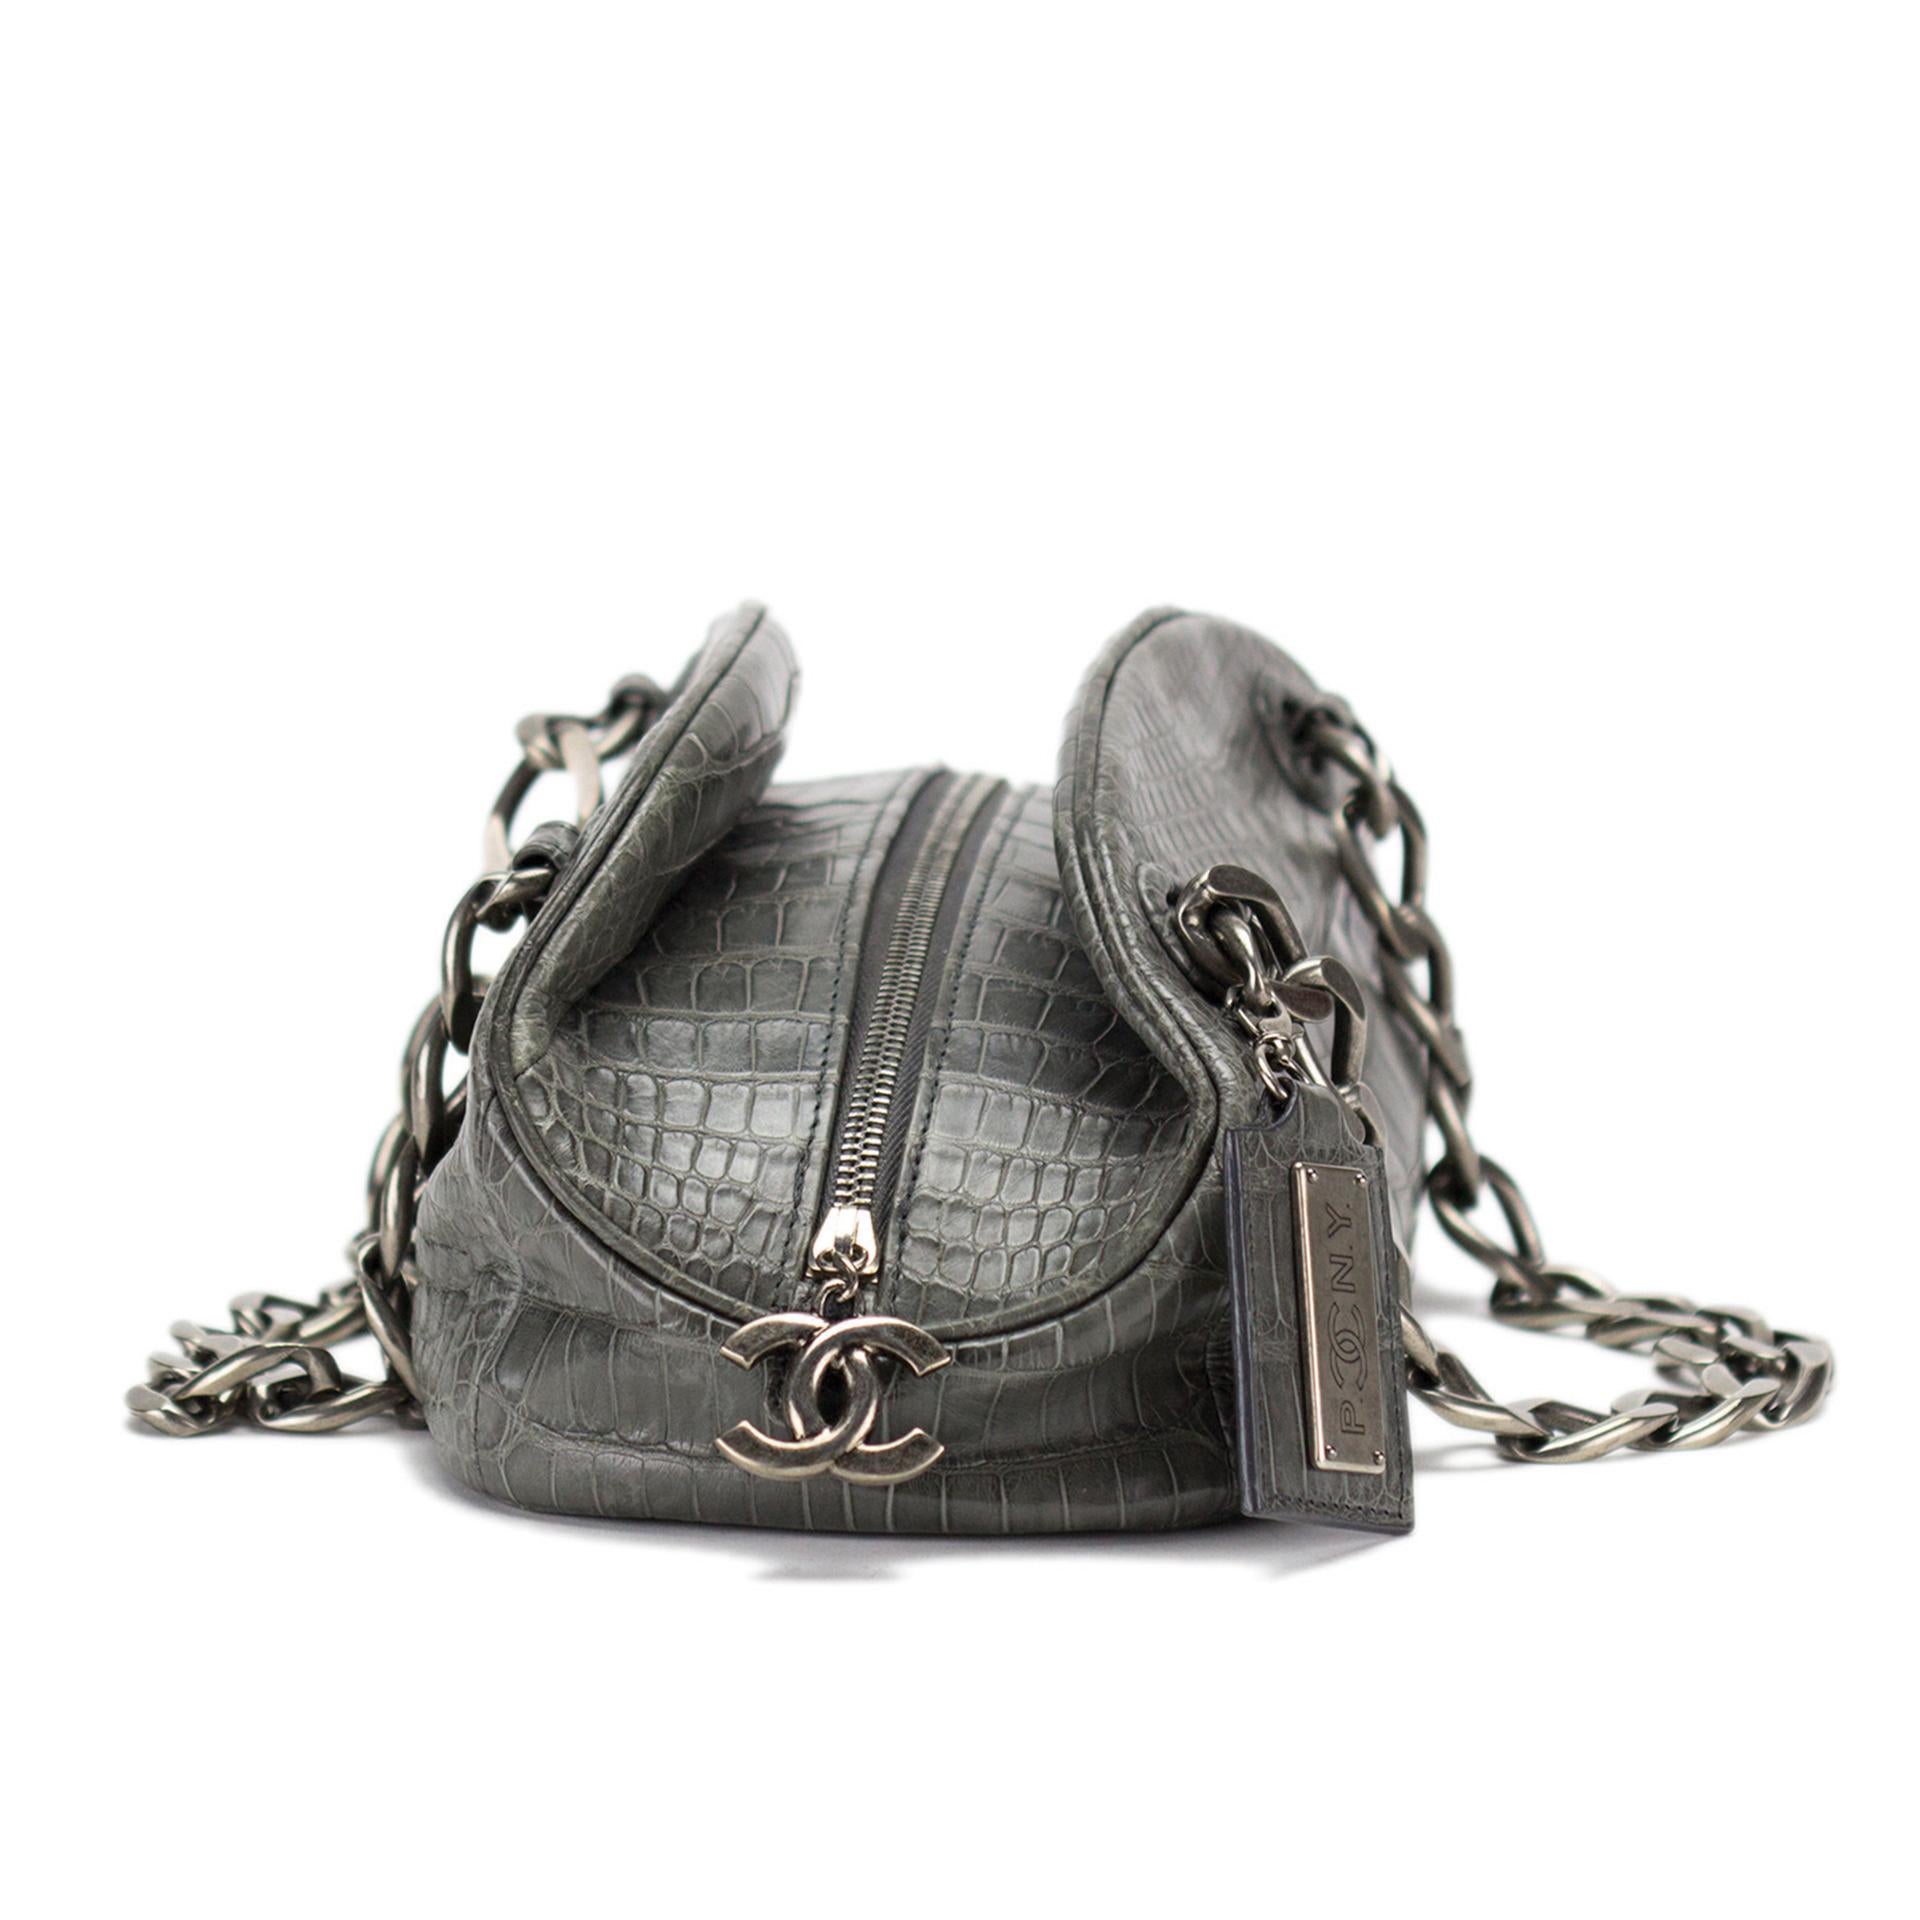 Chanel Bowling Bag Exotic Bowler Paris NY Grey Crocodile Skin Leather Satchel For Sale 3